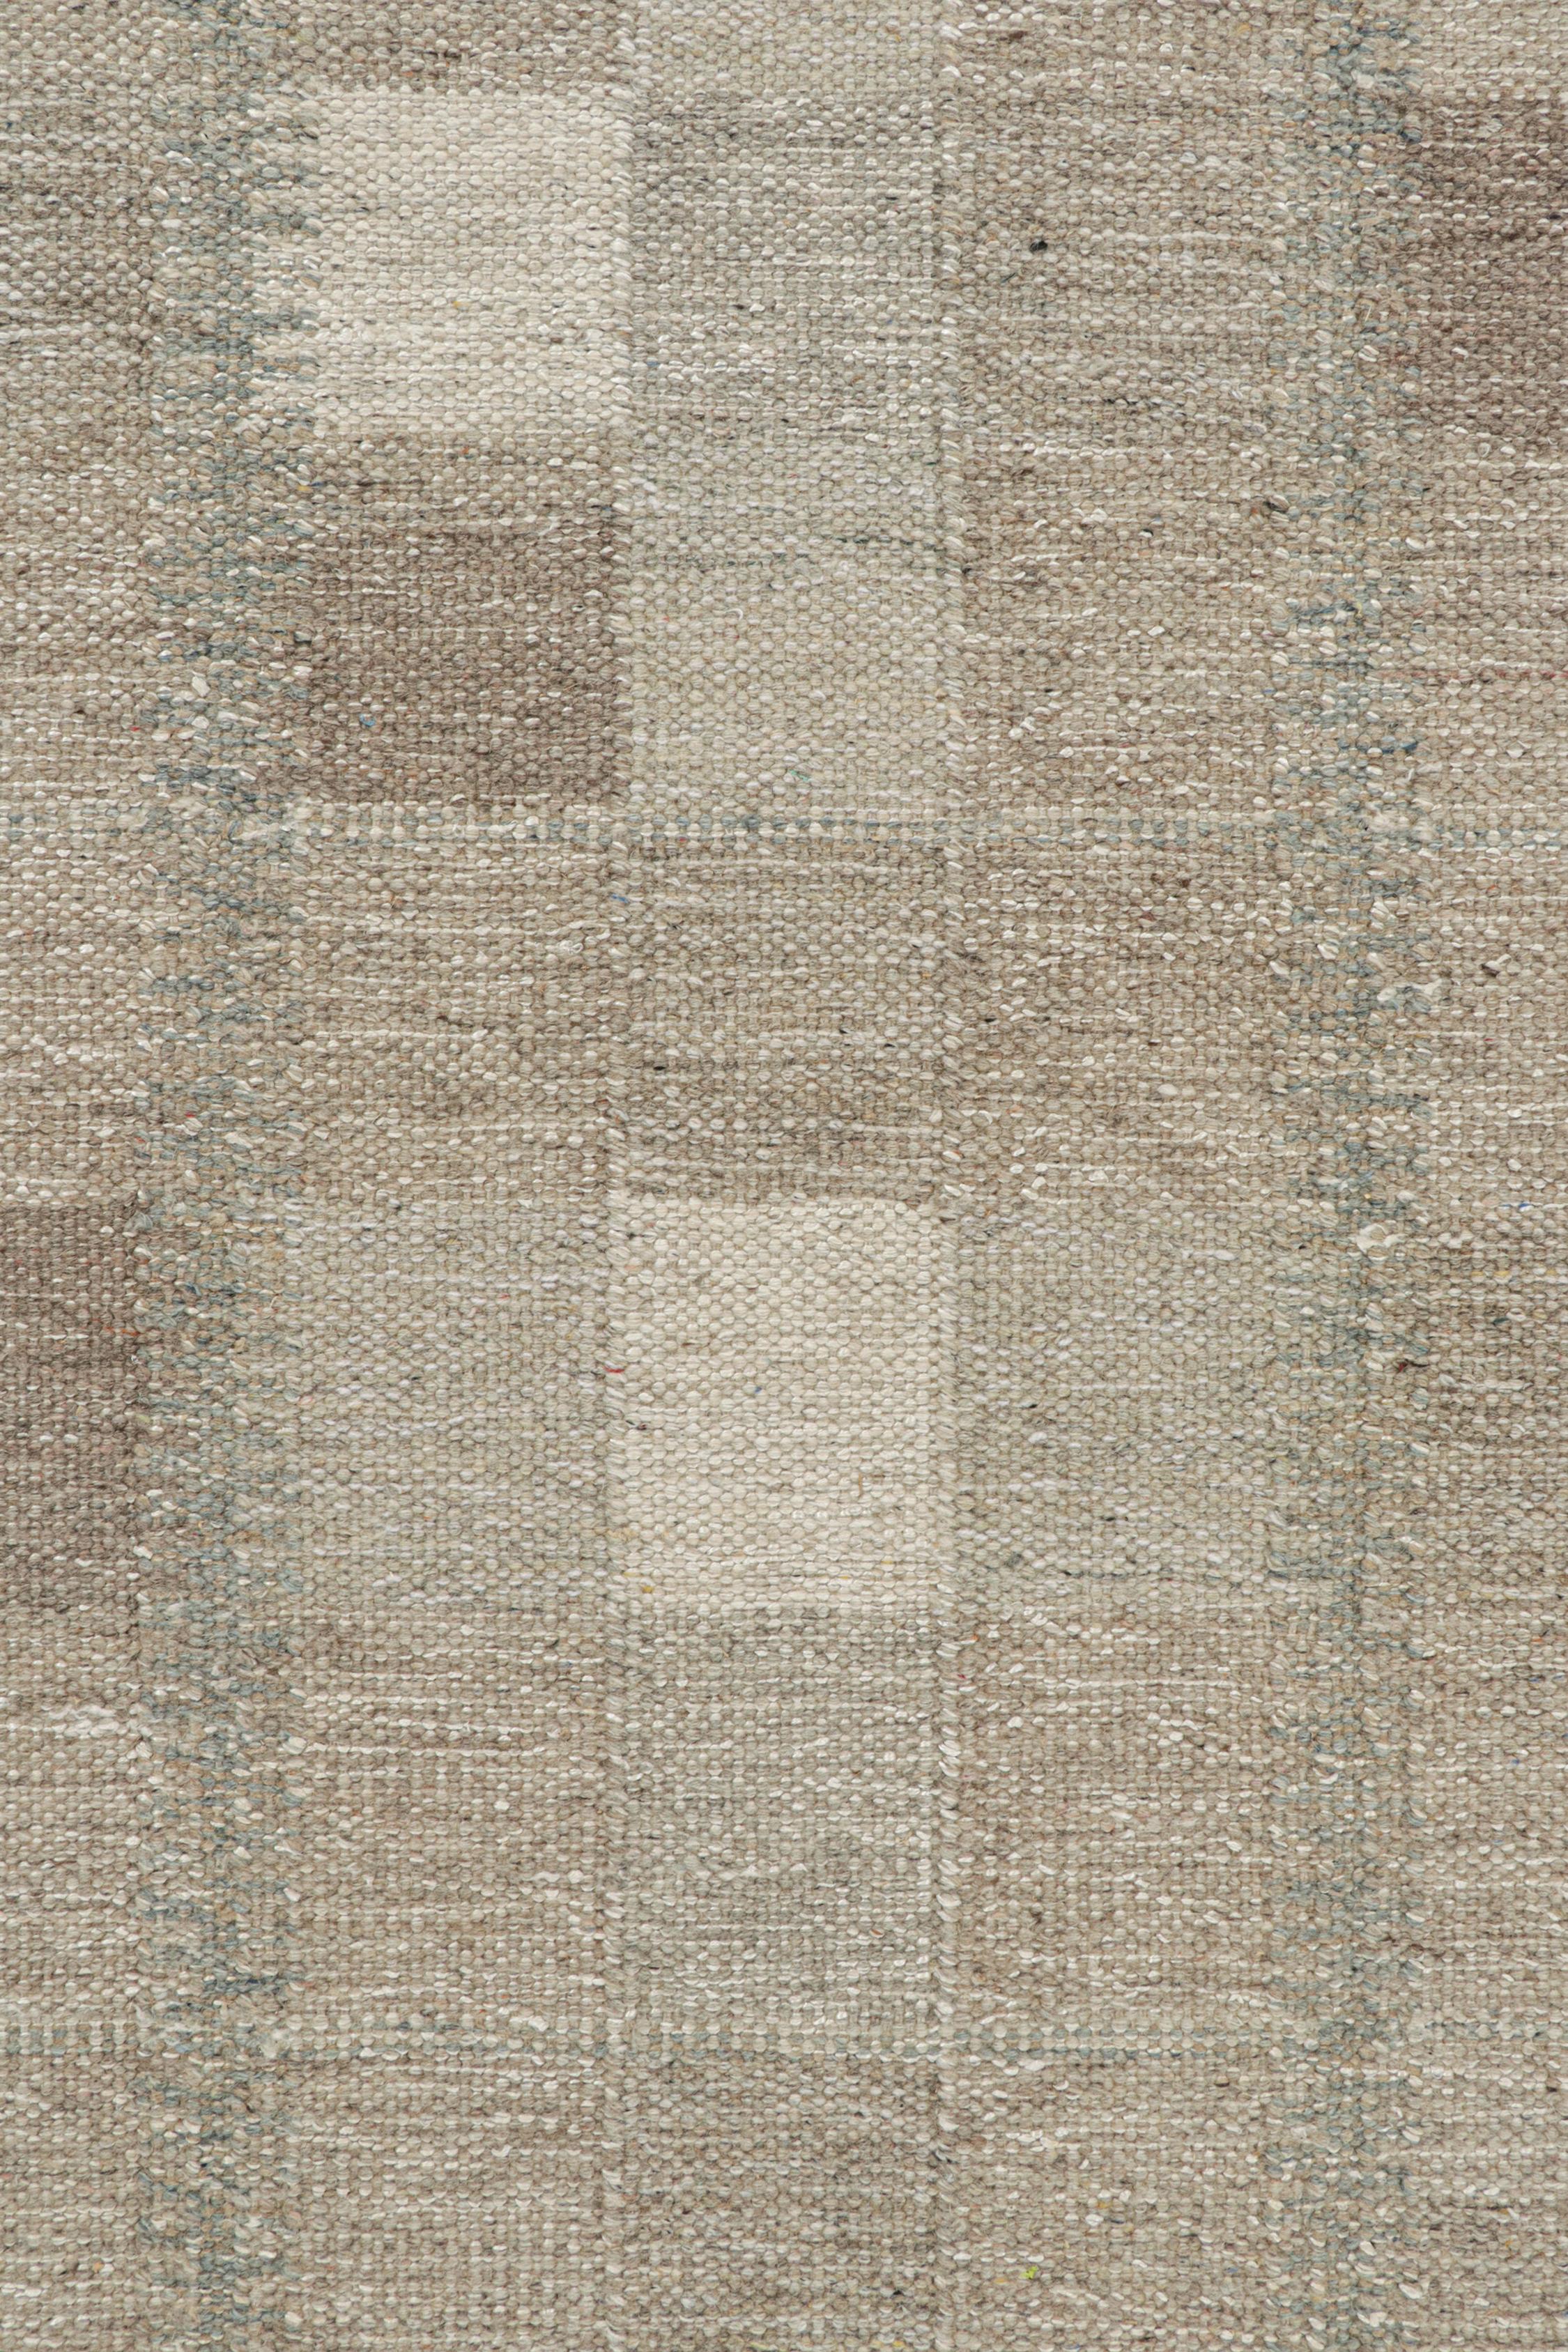 Rug & Kilim’s Scandinavian Style Kilim in Taupe & Gray Geometric Pattern In New Condition For Sale In Long Island City, NY